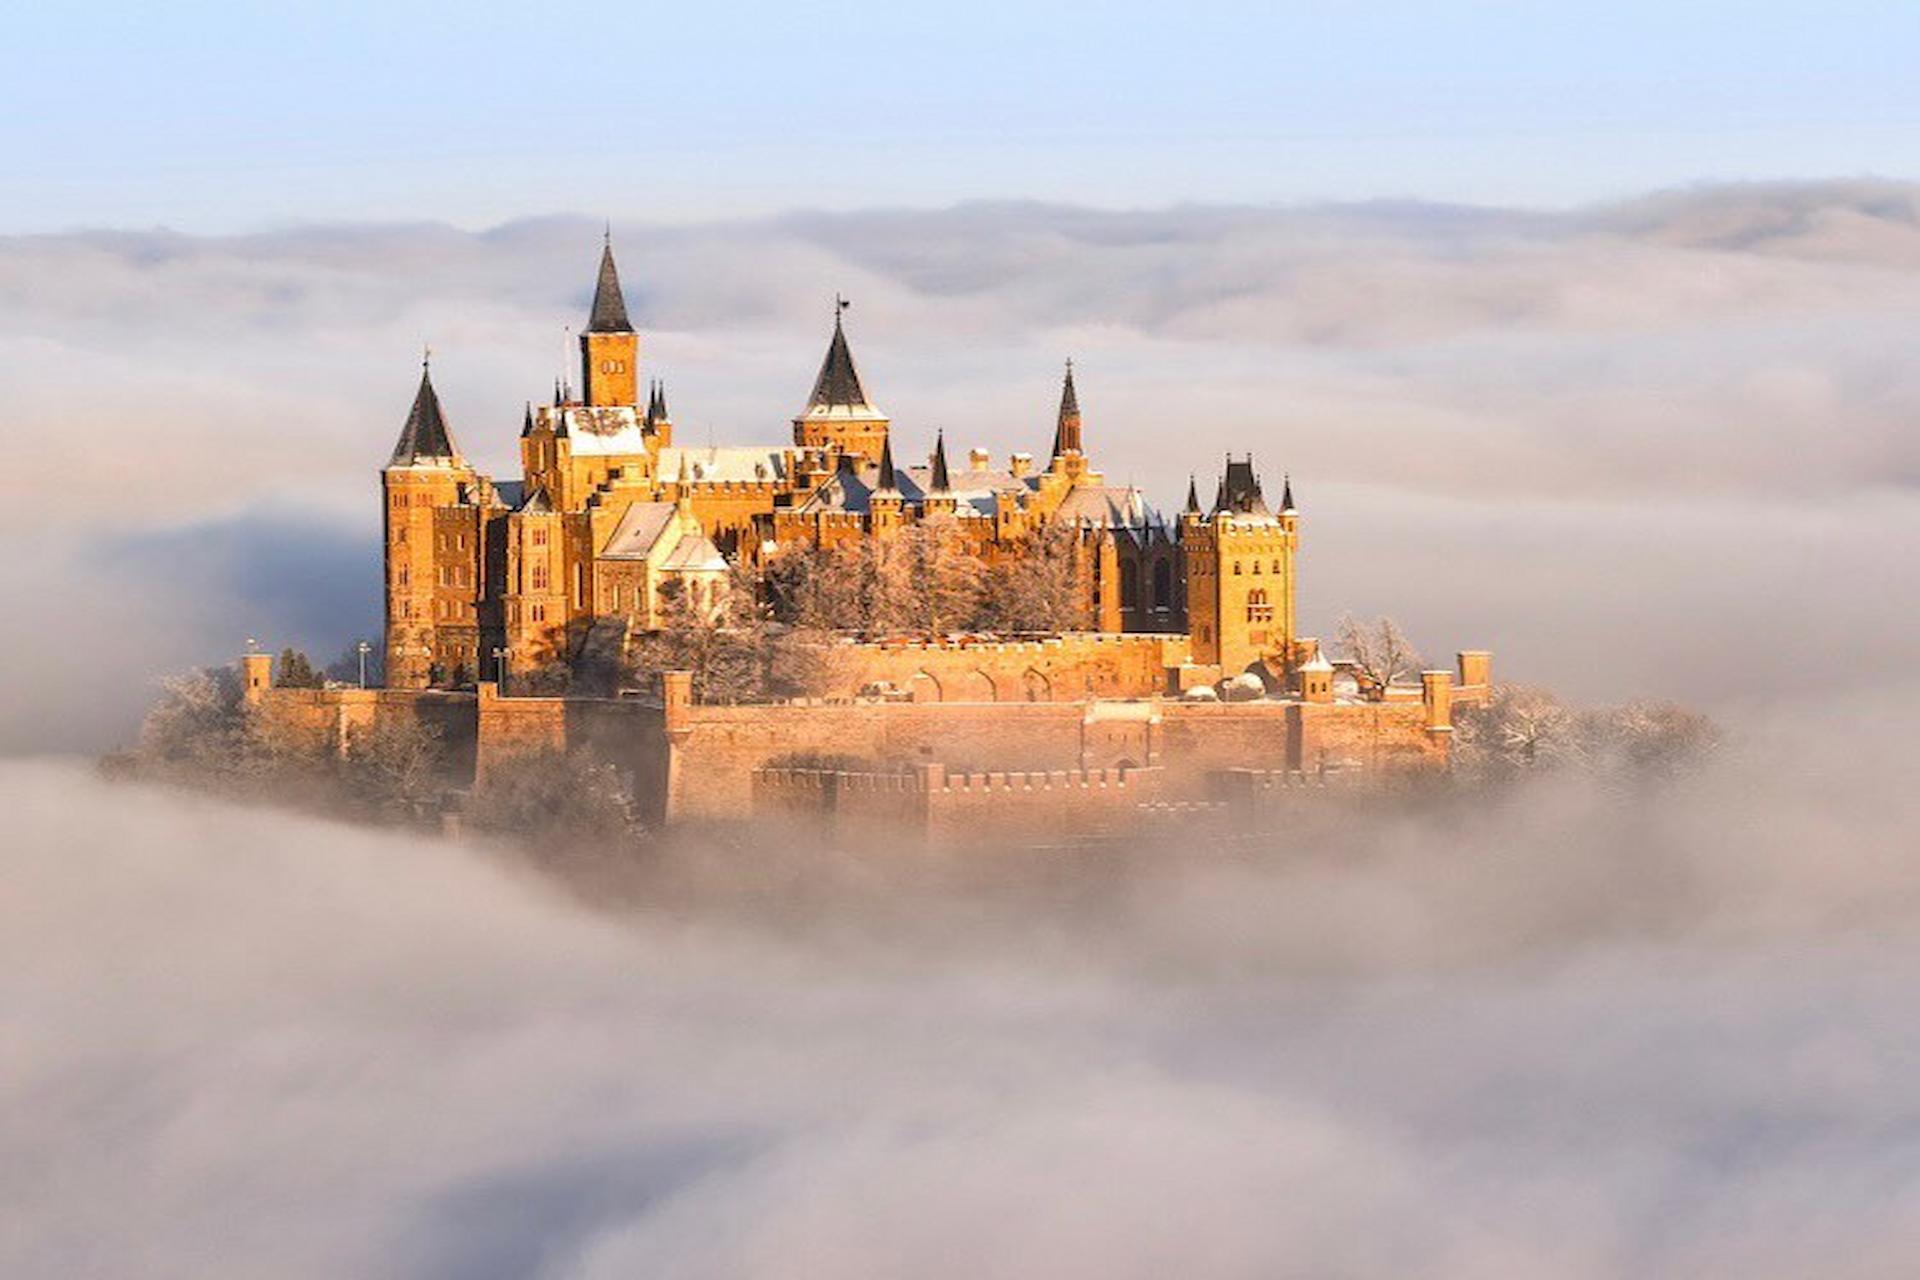 5 Impressive Medieval Castles In Western Europe To Visit This Summer